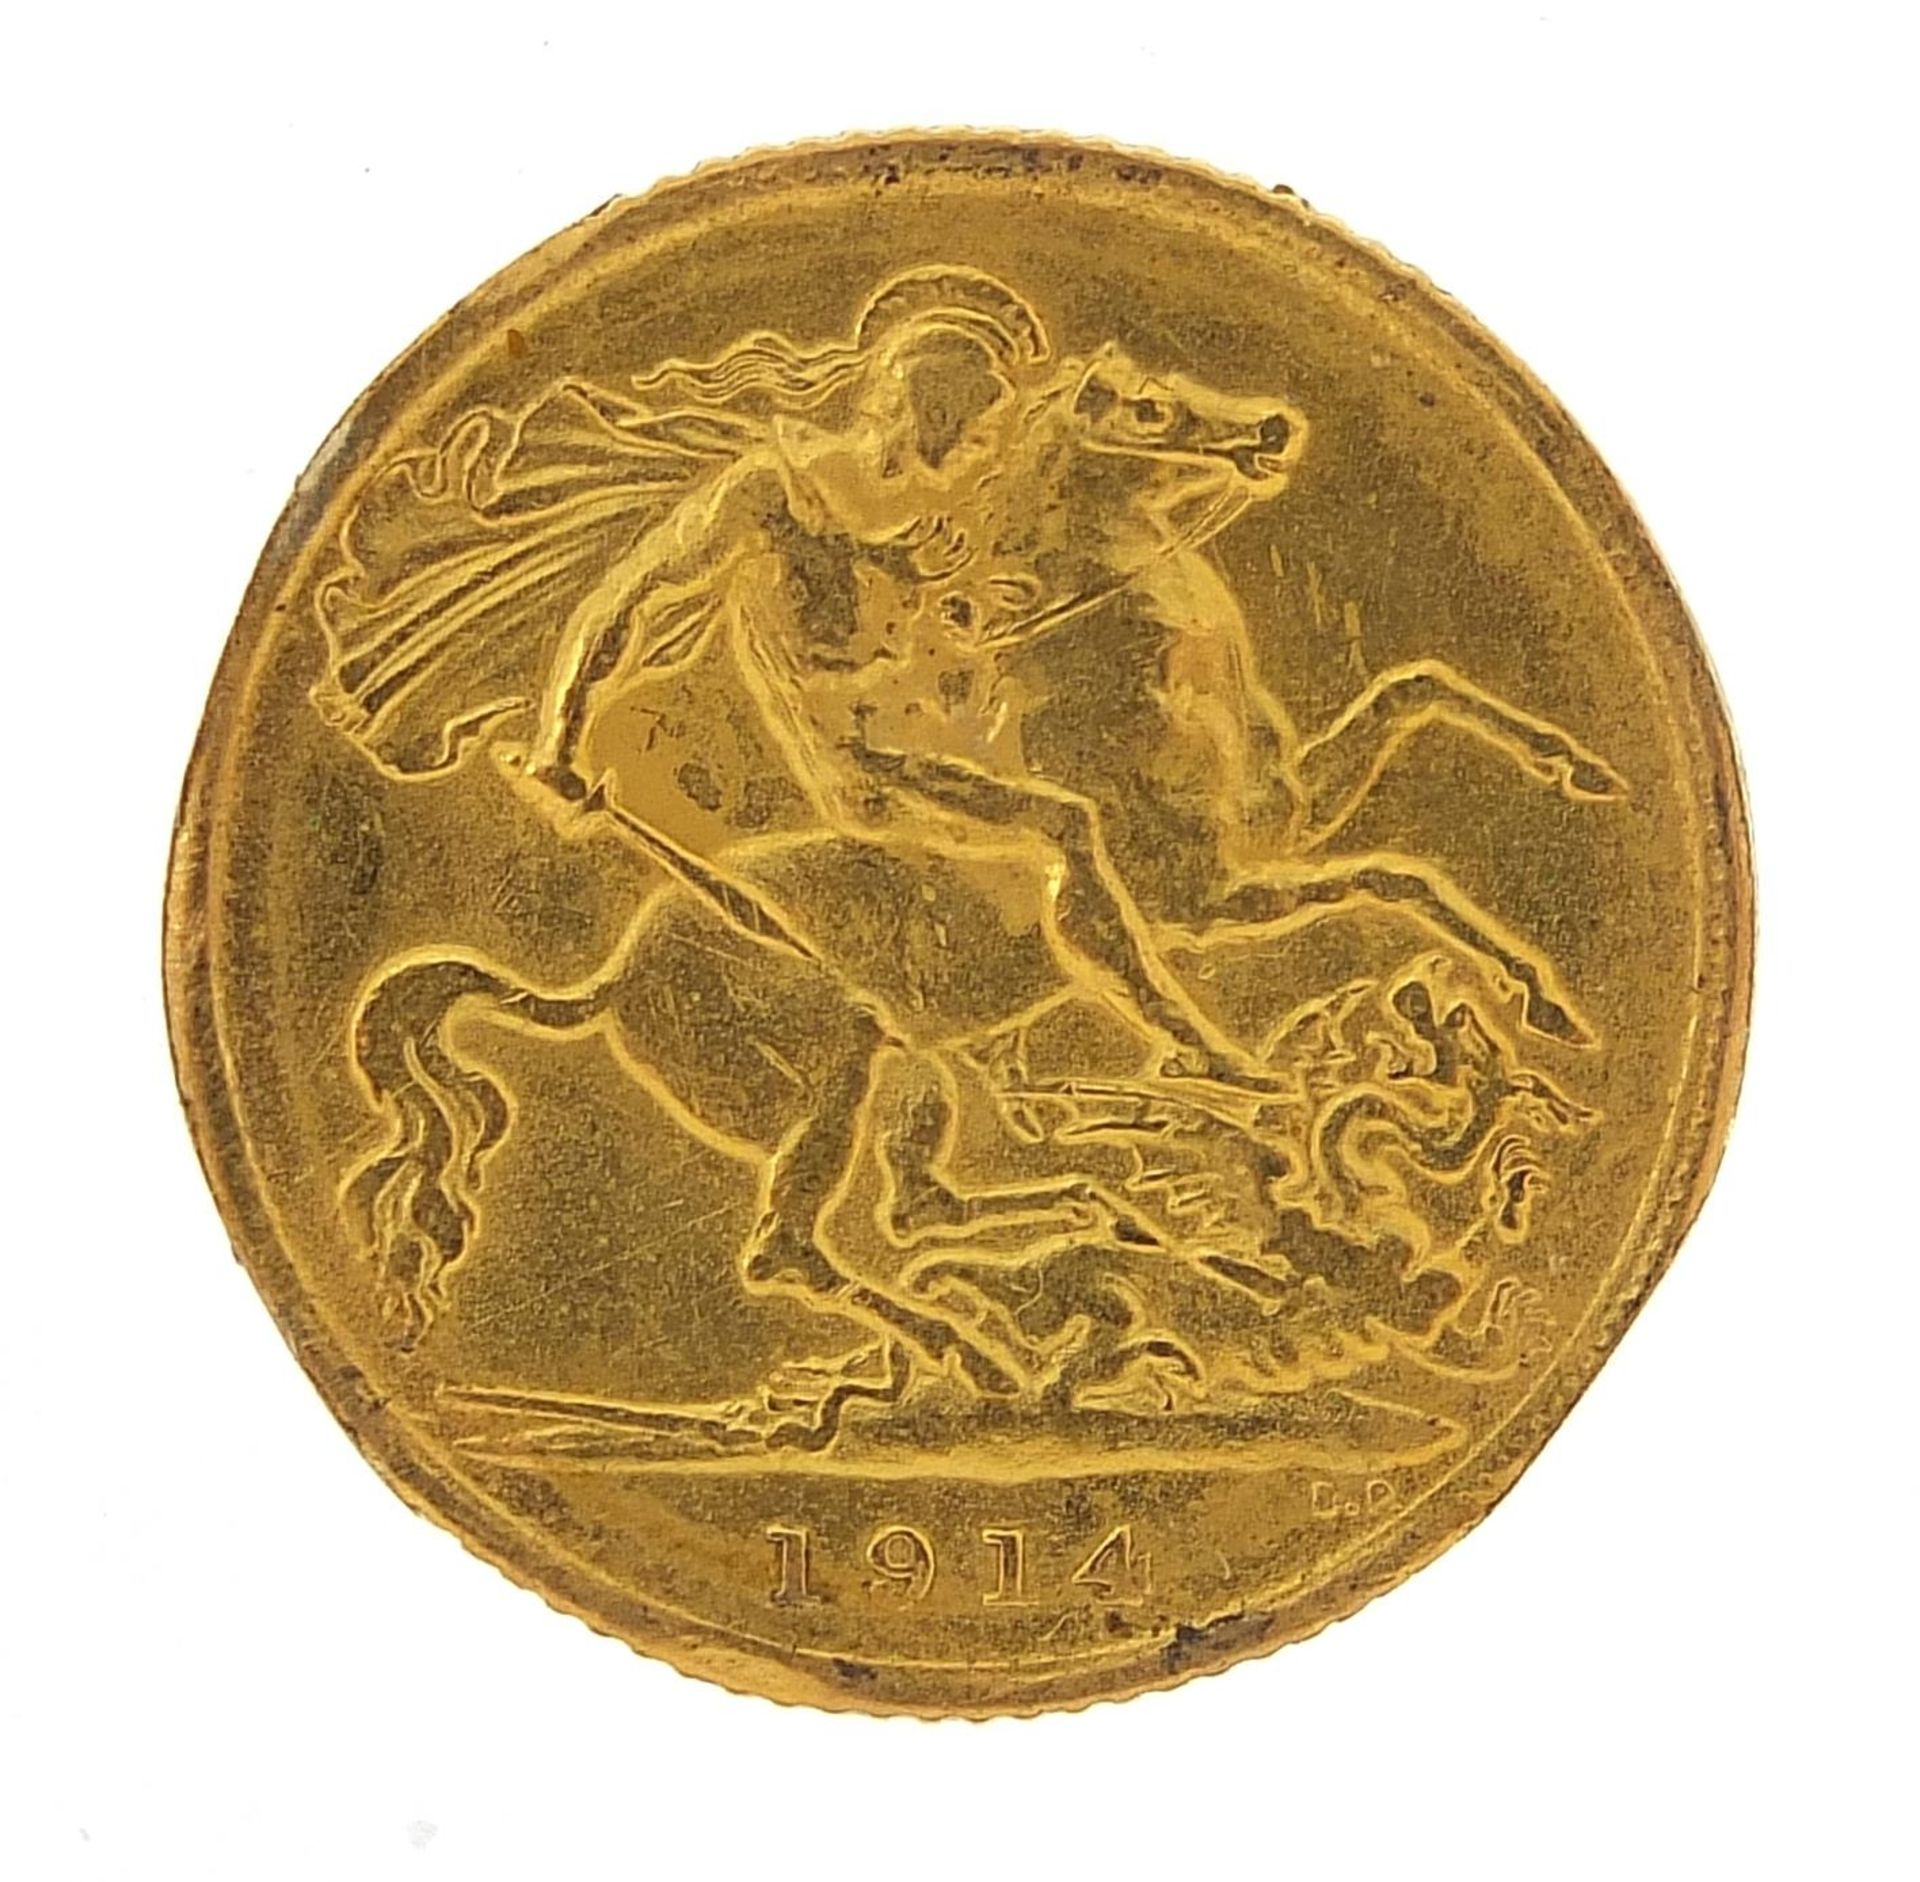 George V 1914 gold half sovereign - this lot is sold without buyer's premium